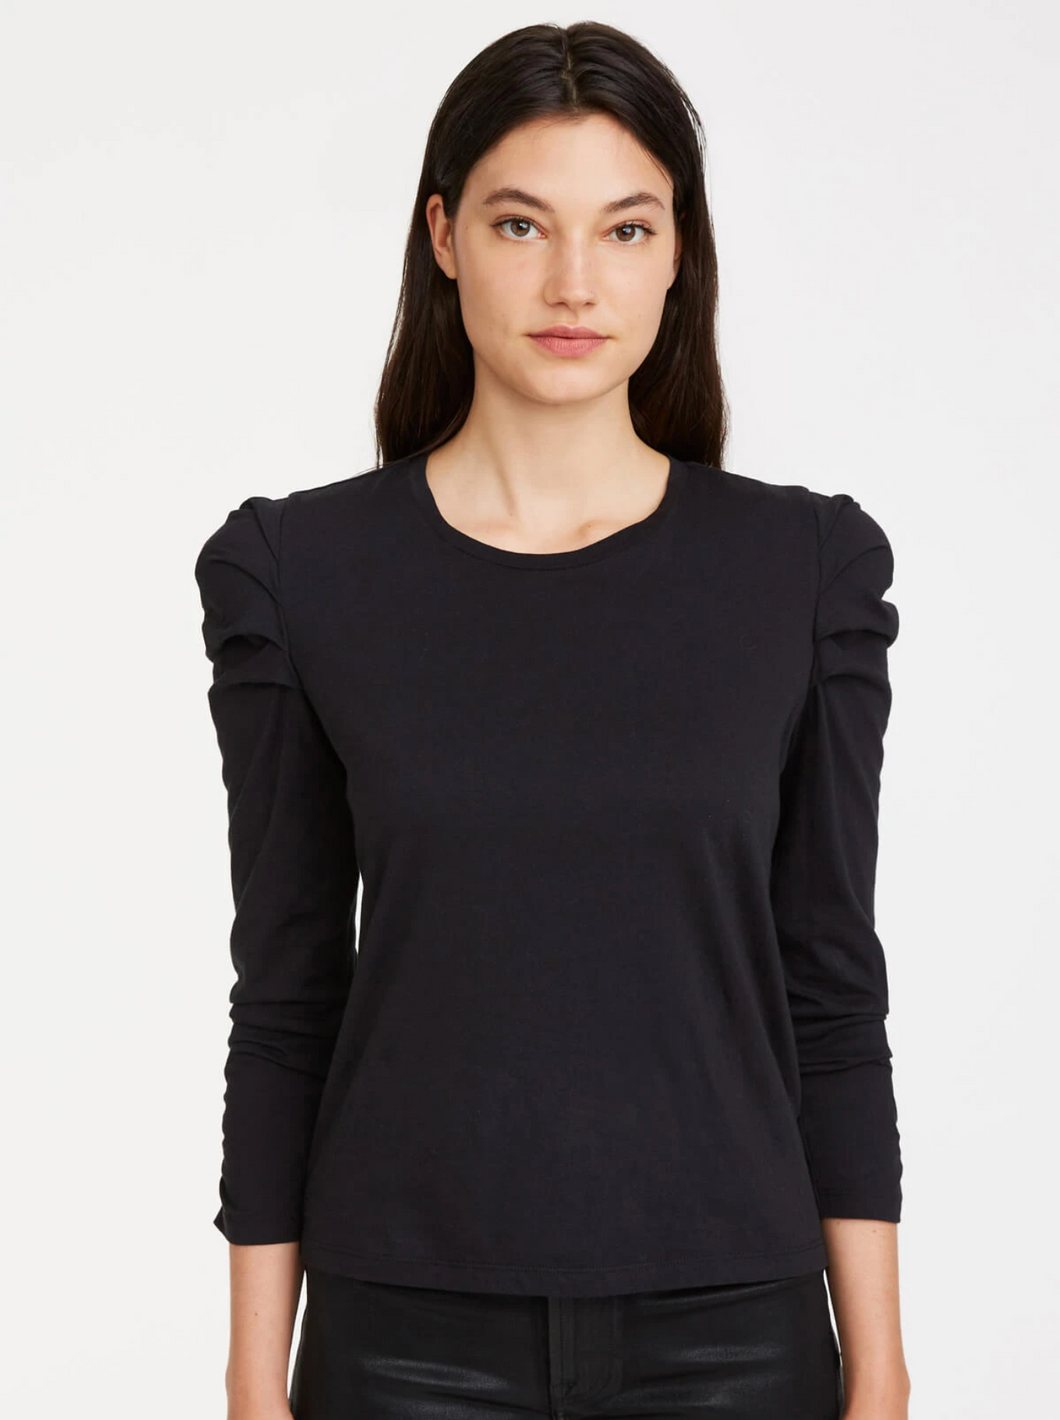 Update your closet with this elevated essential. Ruched details create gentle pleats on the side shoulders of a fitted top. Crafted in organic cotton jersey with a banded neck, 3/4 sleeves, and straight hem. Tuck into a coated skinny for a chic, modern look.